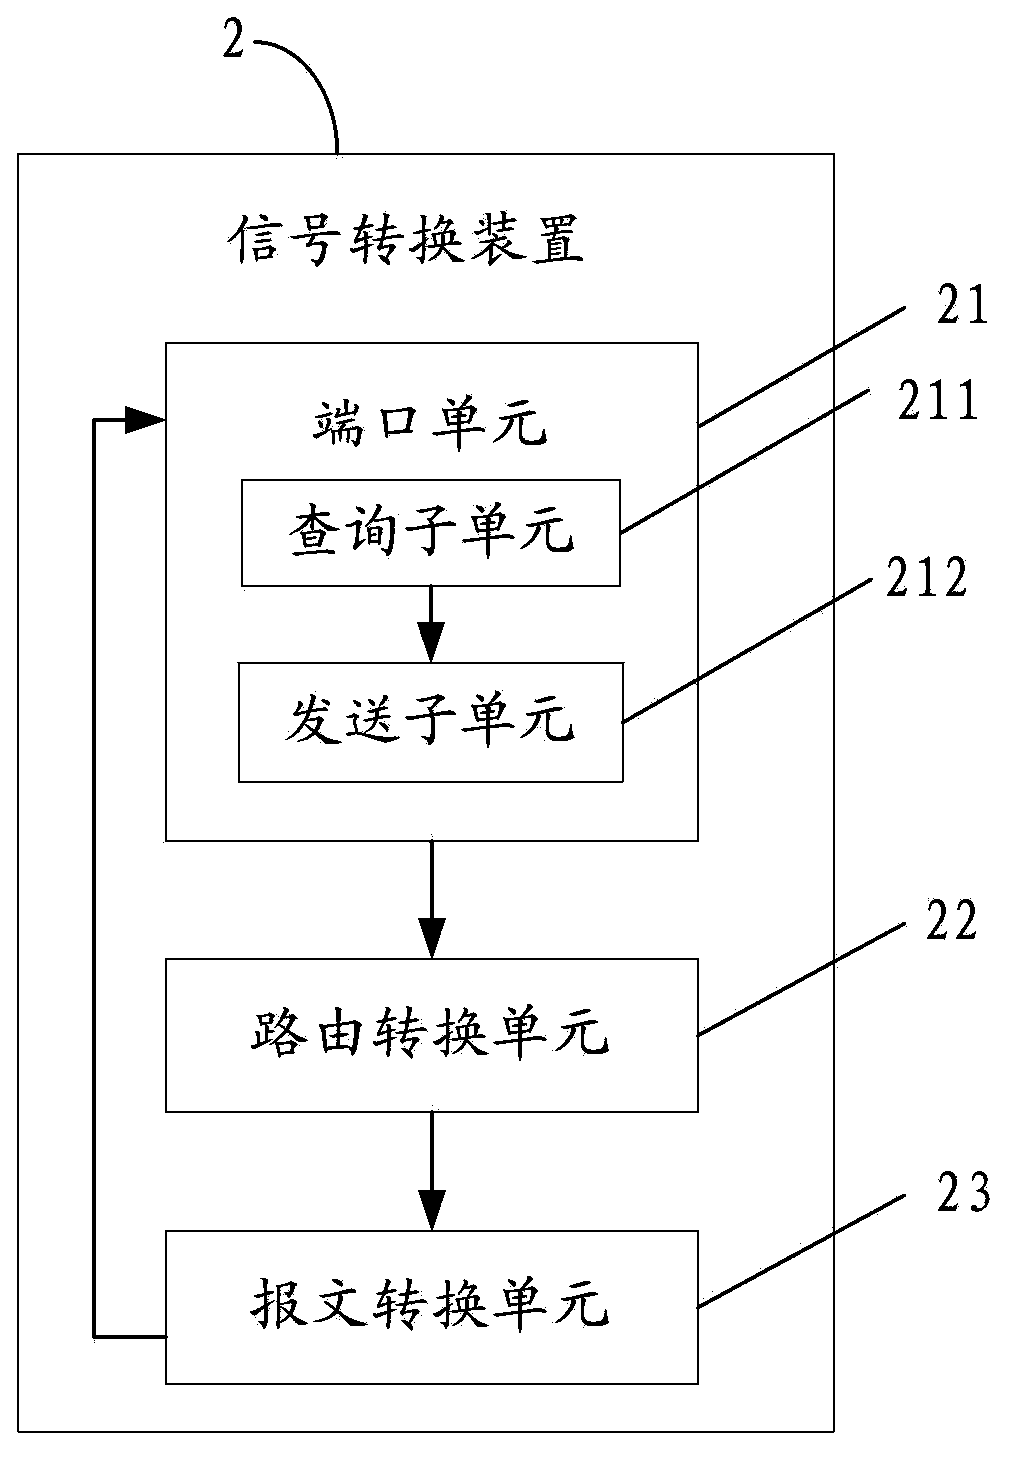 Signal conversion method, device and system